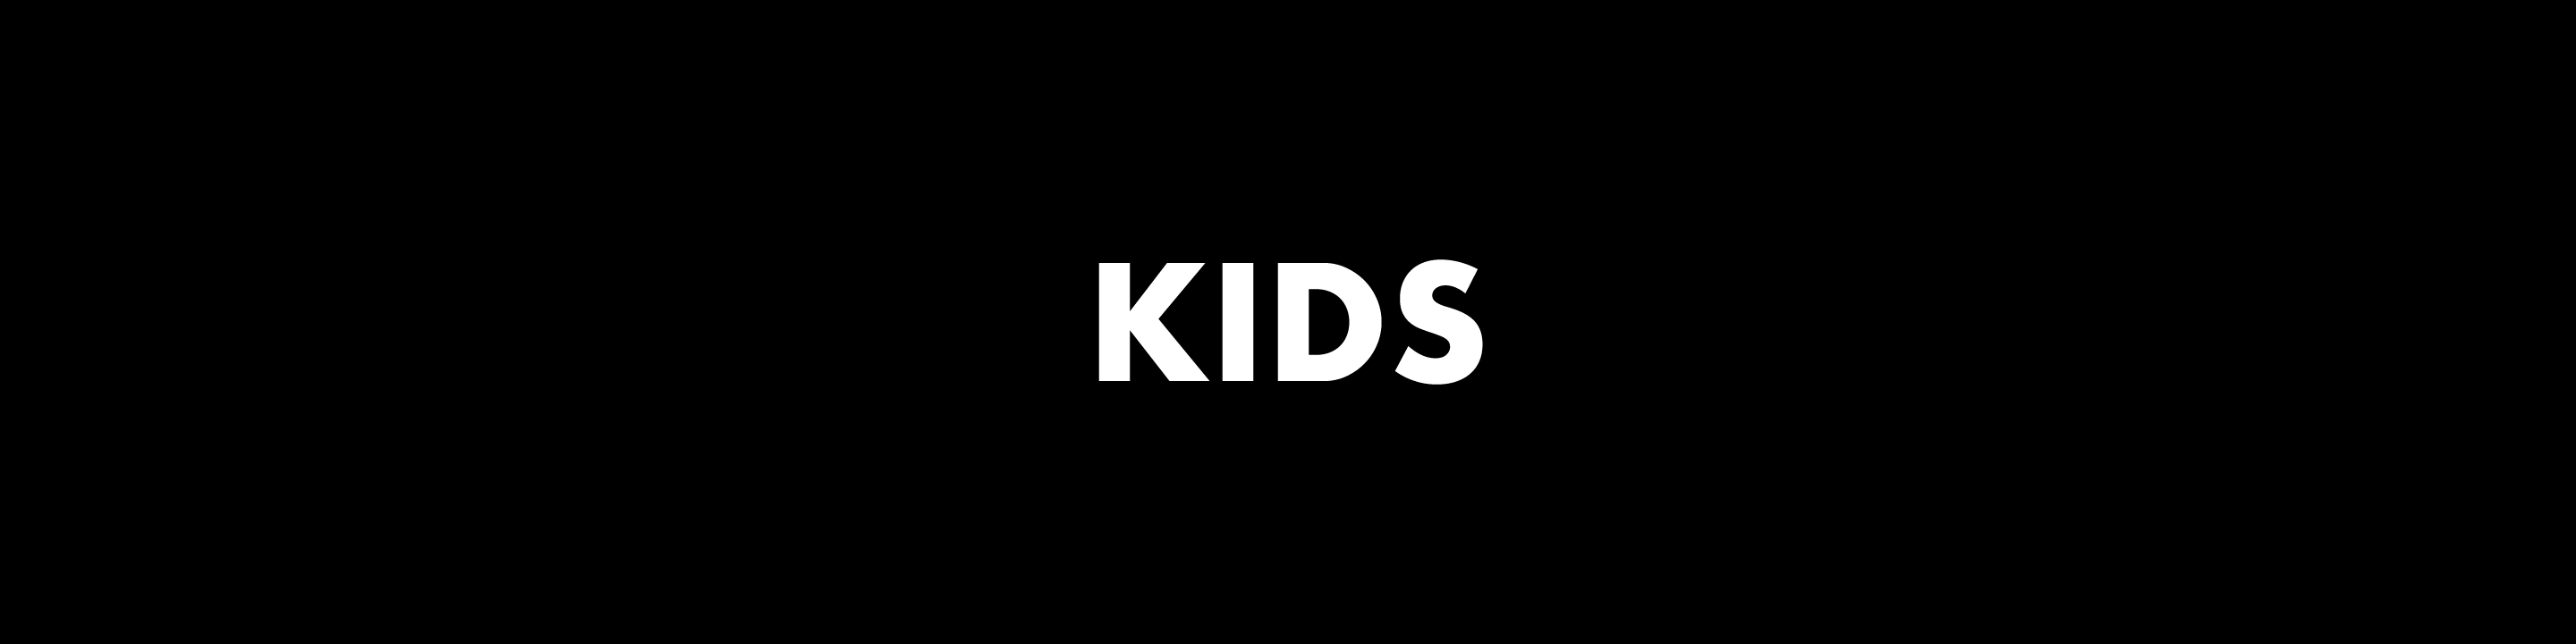 KIDS | CUNE Official Global Online Store